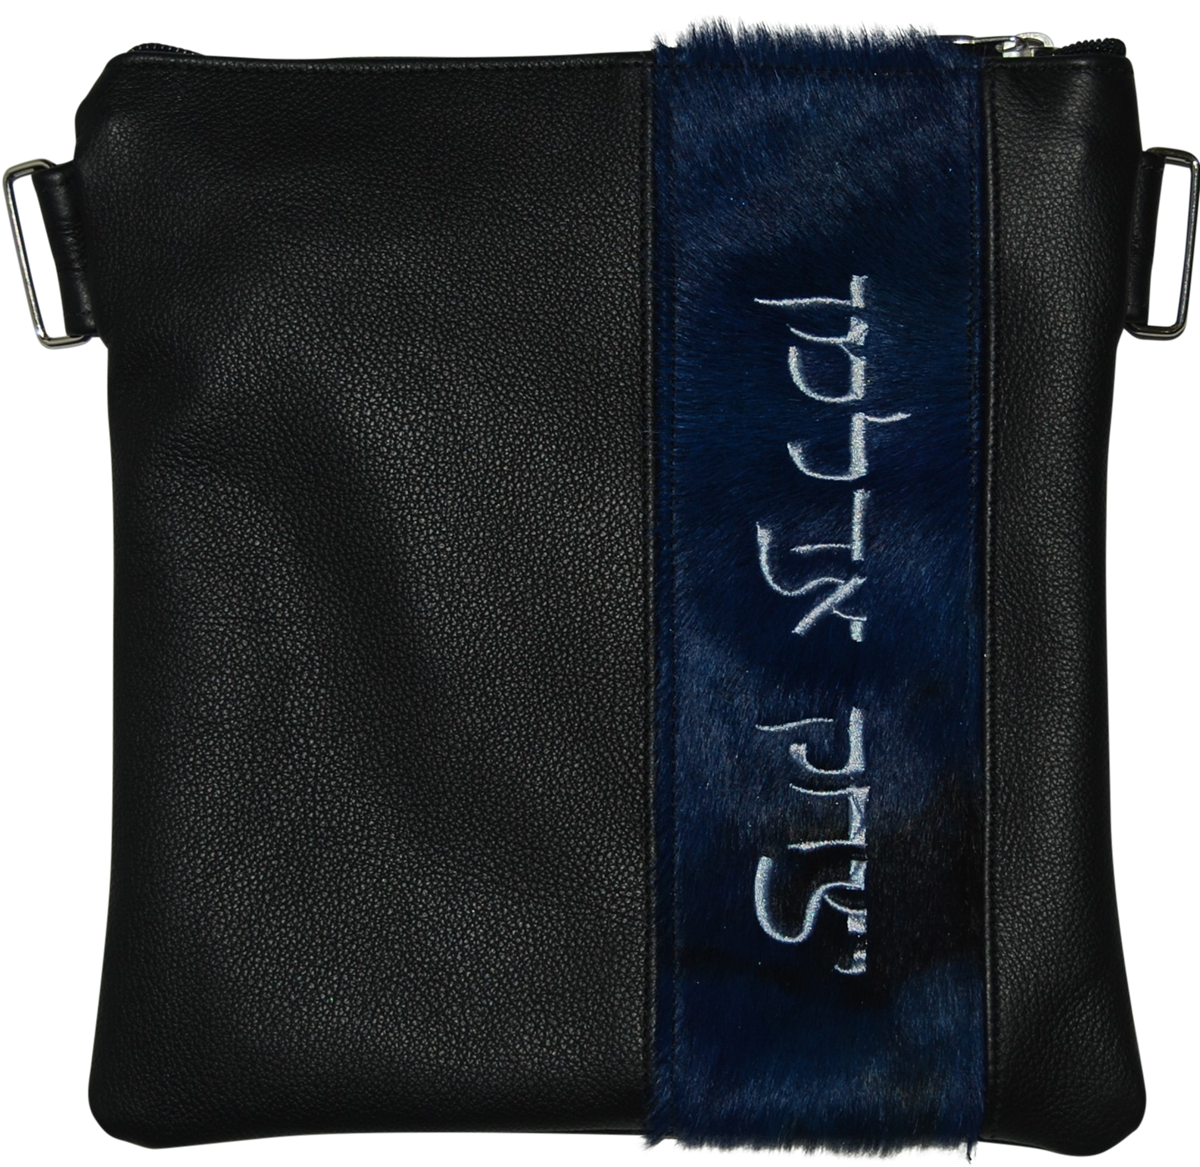 Textured Leather With Name Strip Across